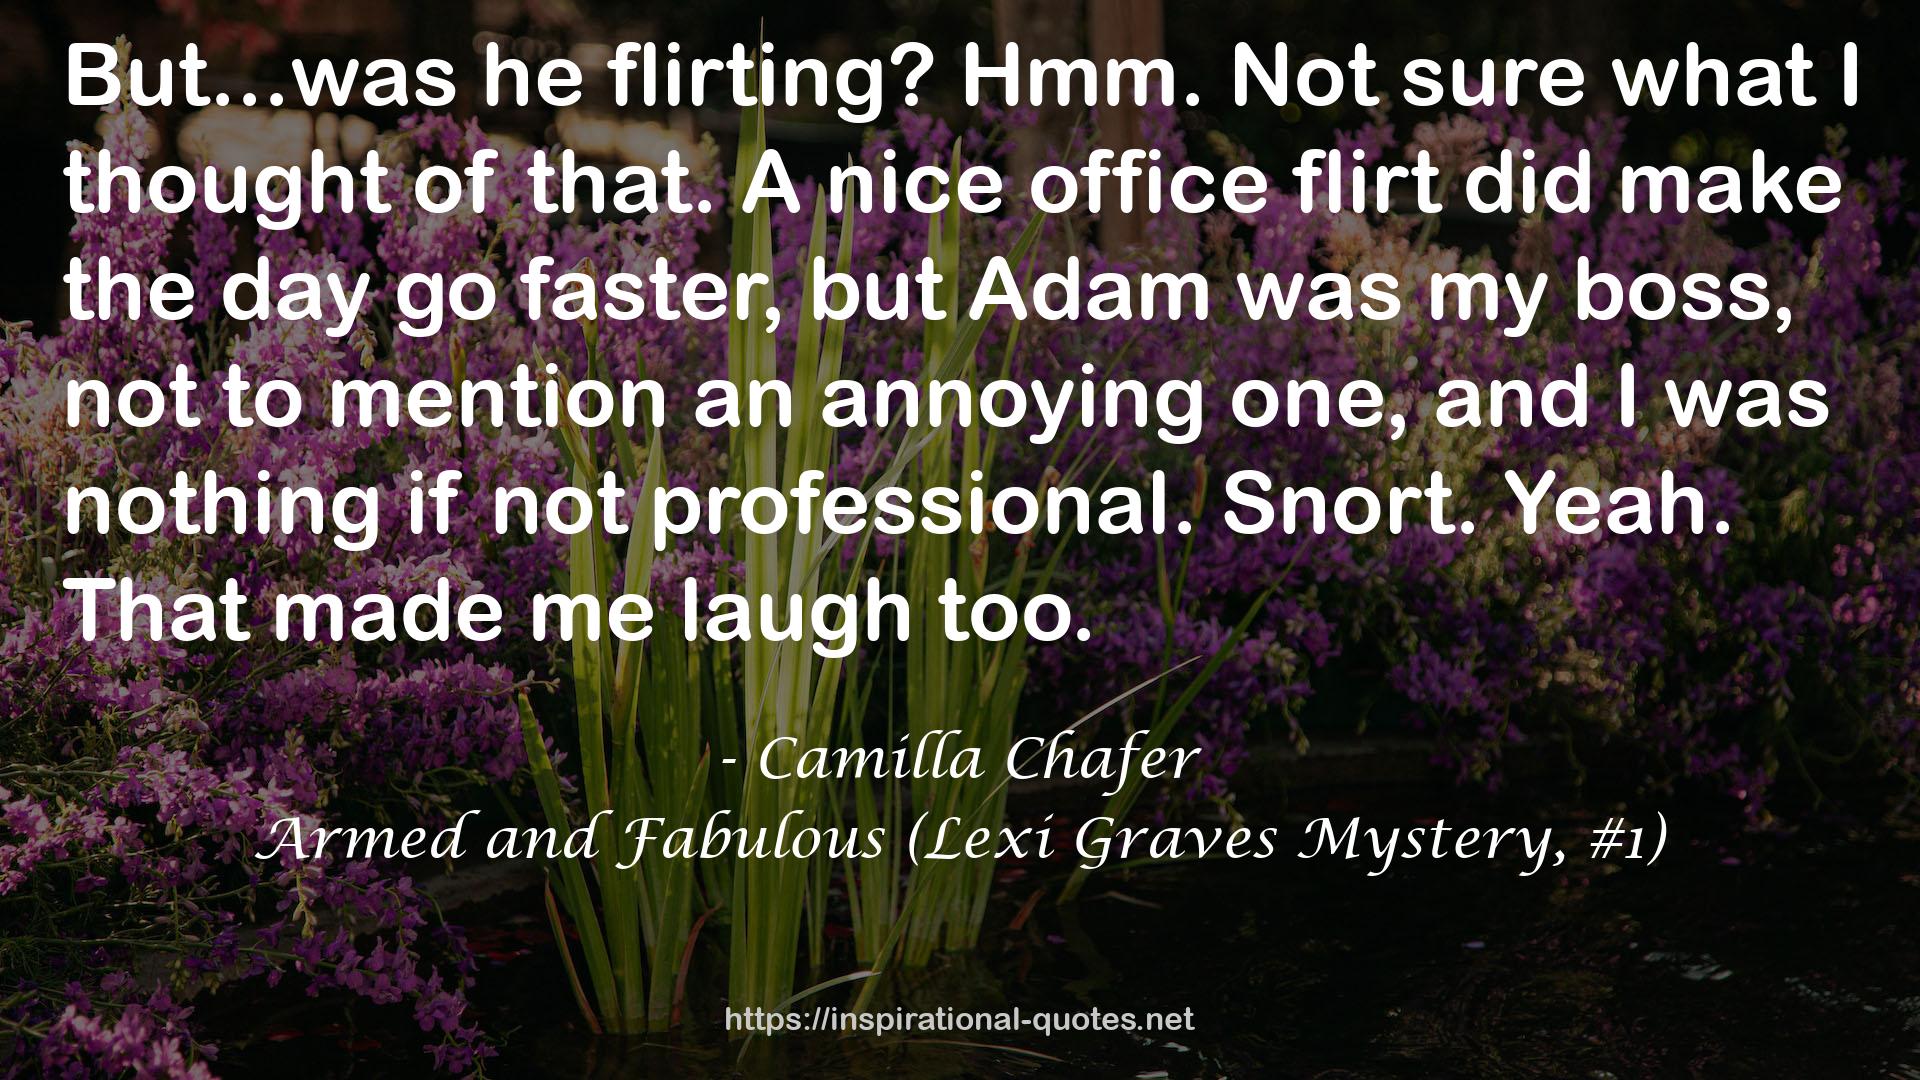 Armed and Fabulous (Lexi Graves Mystery, #1) QUOTES